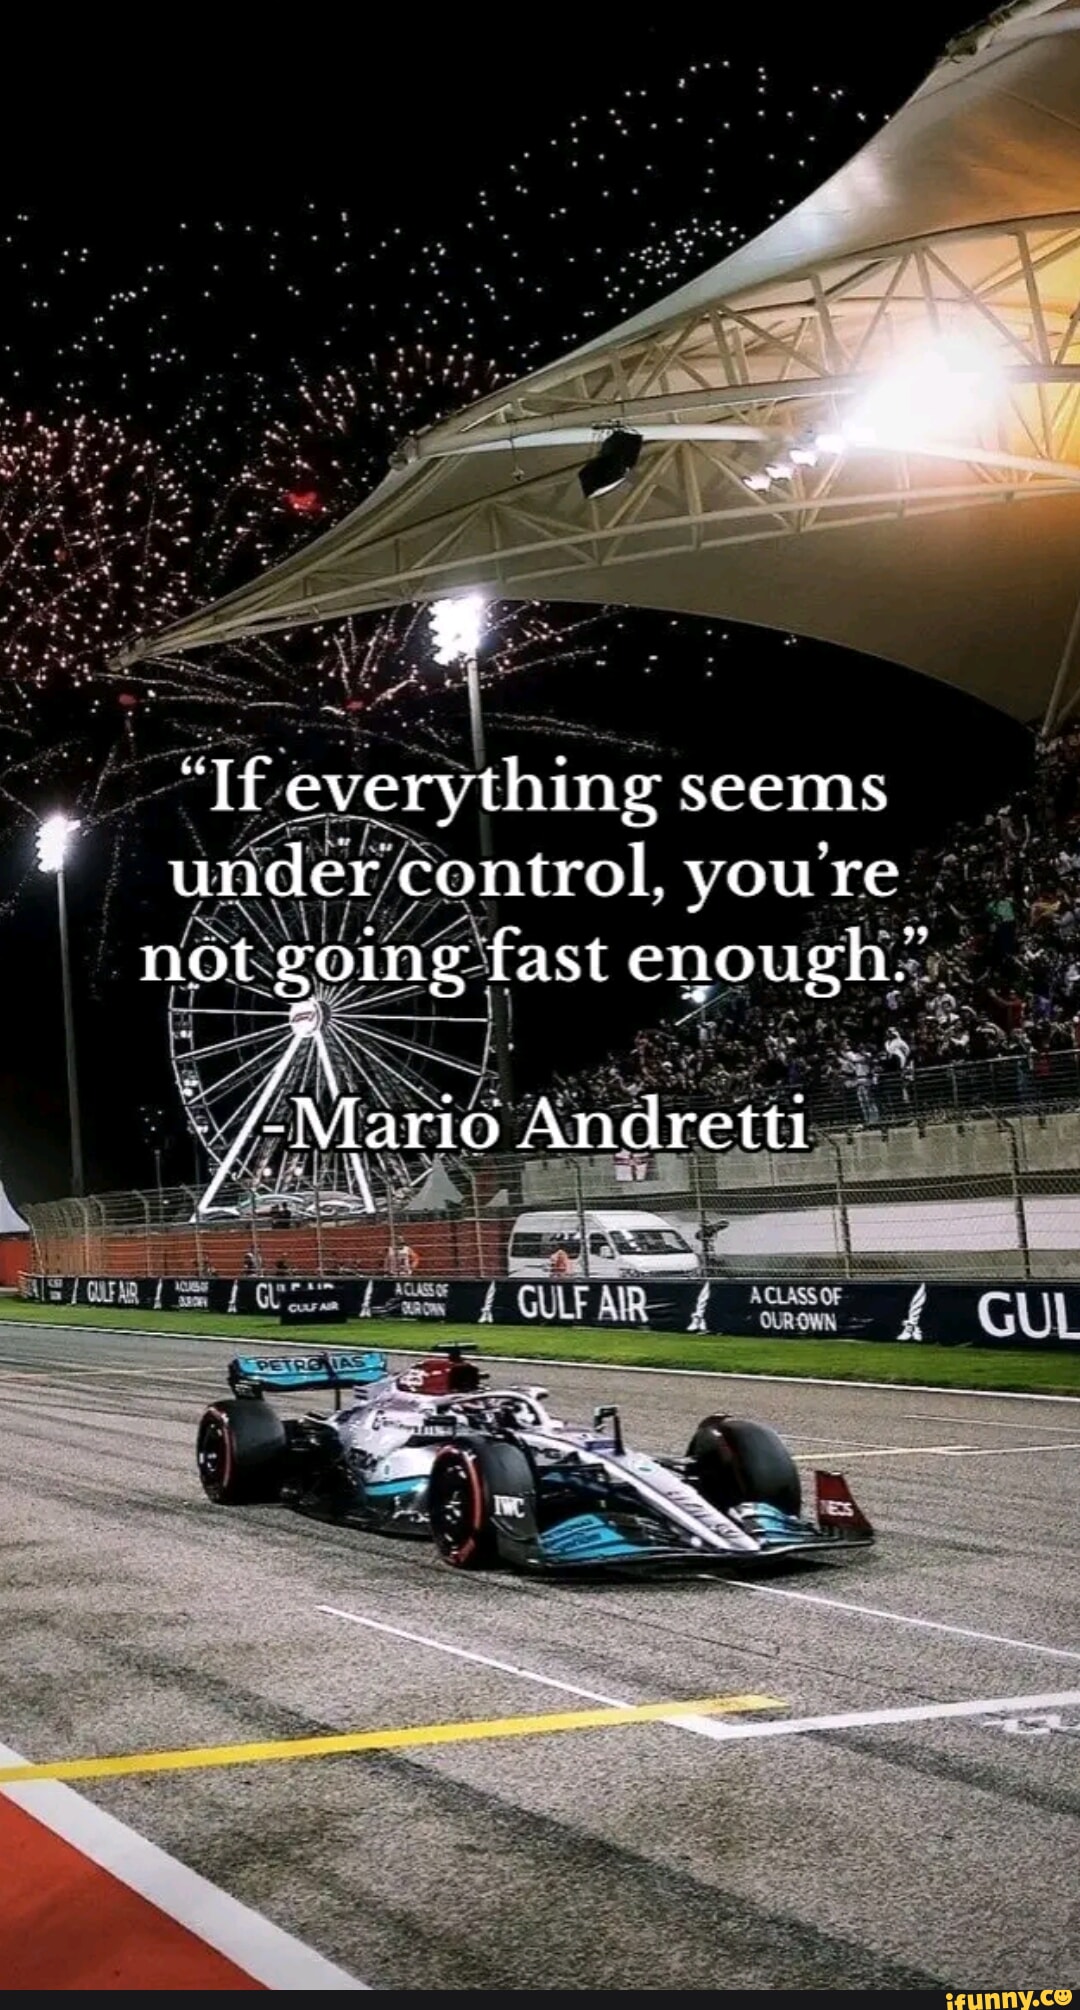 If everything seems under control, you're not going fast enough